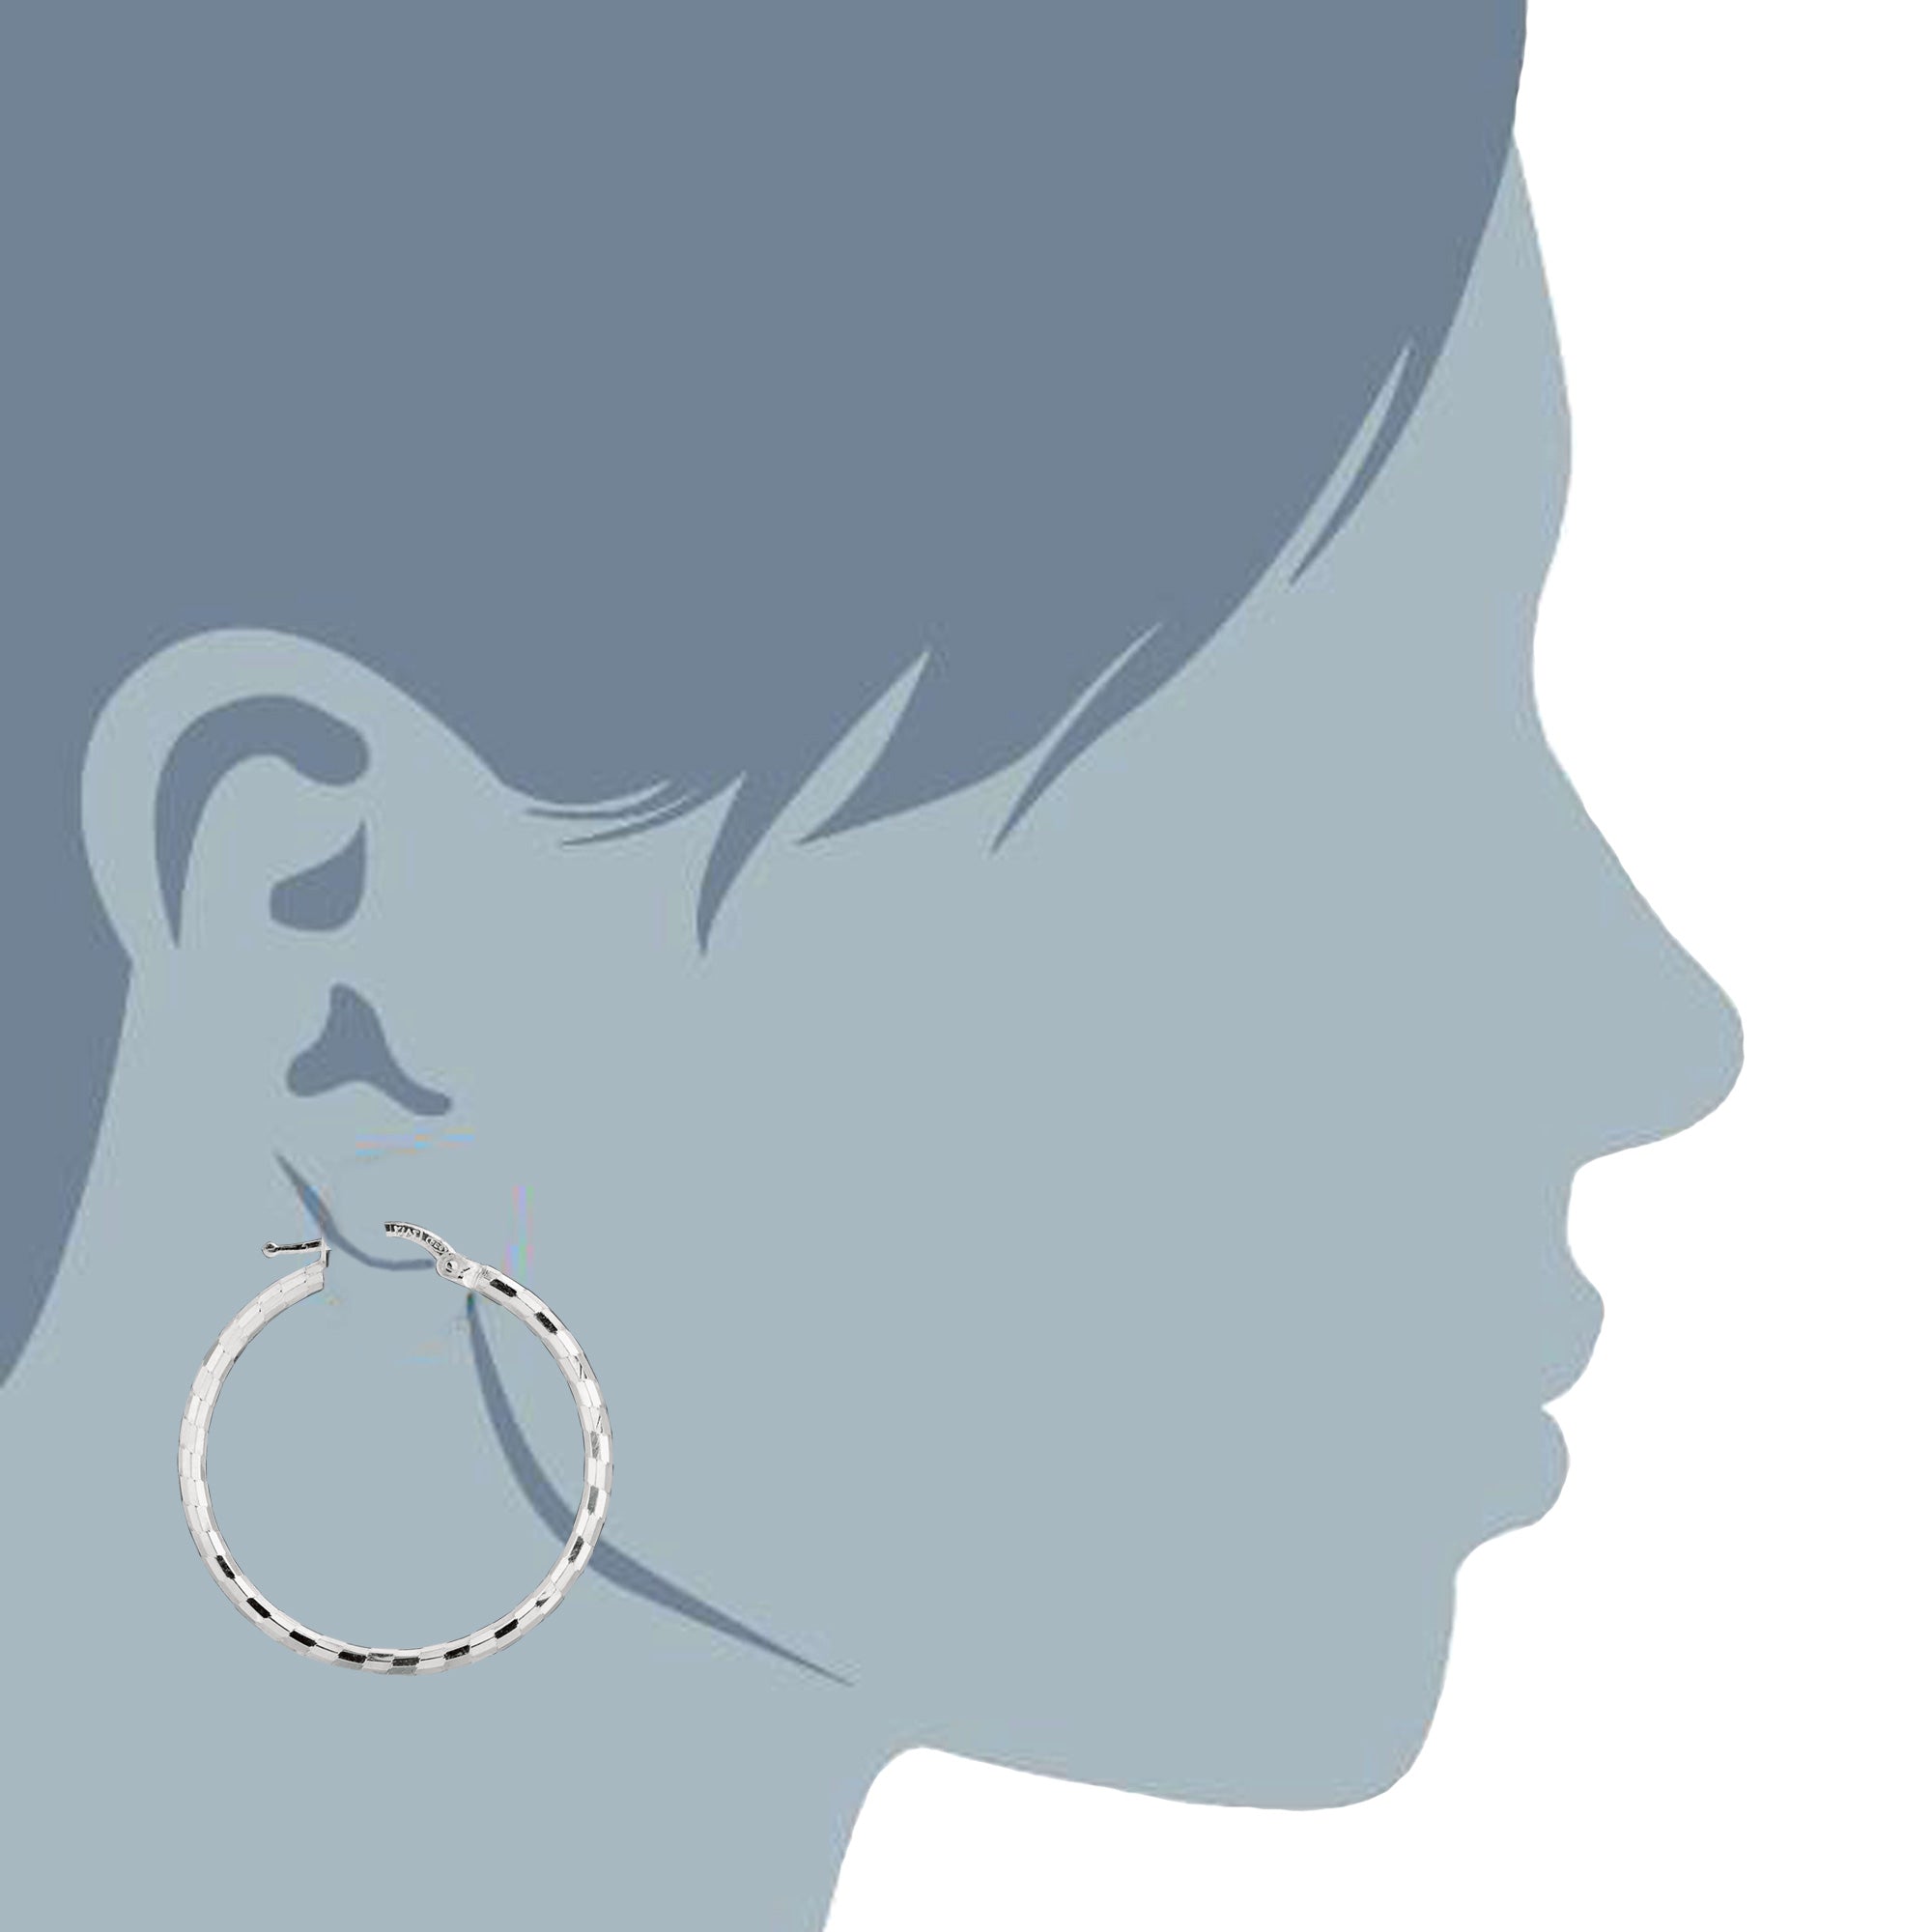 Sterling Silver With Rhodium Plated Shiny Diamond Cut Finish Round Hoop Earrings fine designer jewelry for men and women